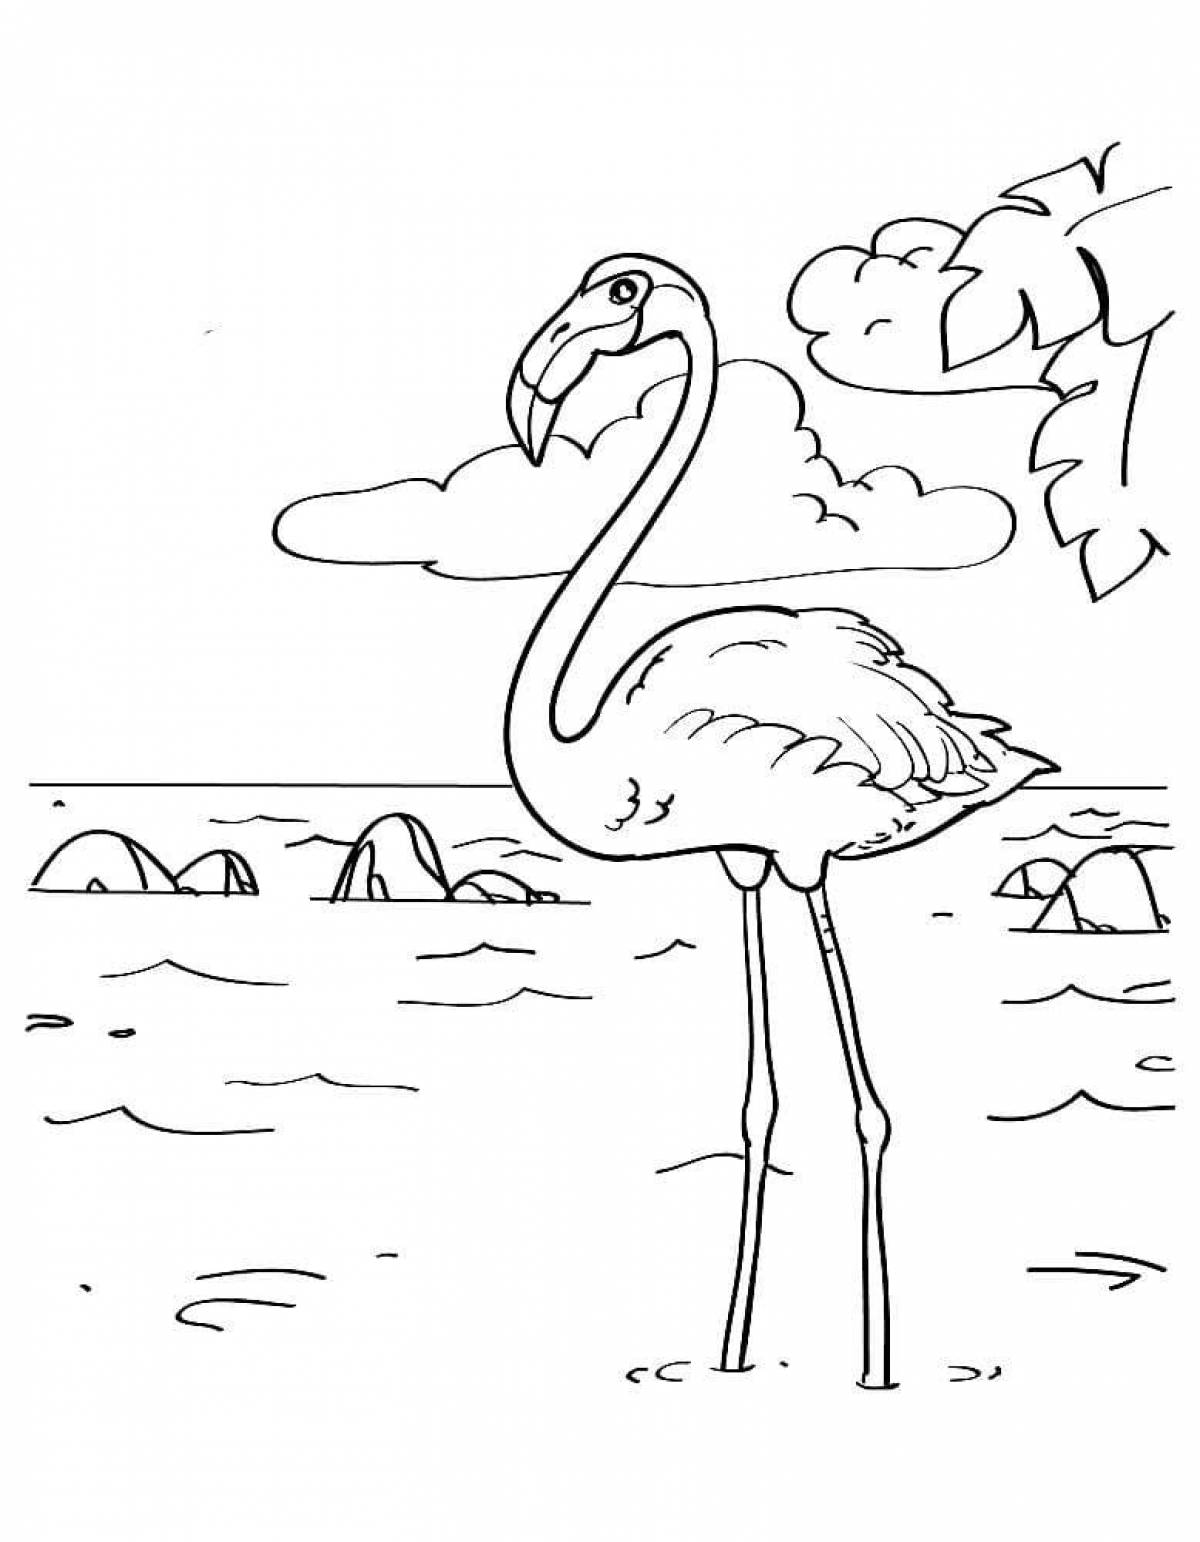 Fabulous flamingo coloring pages for kids